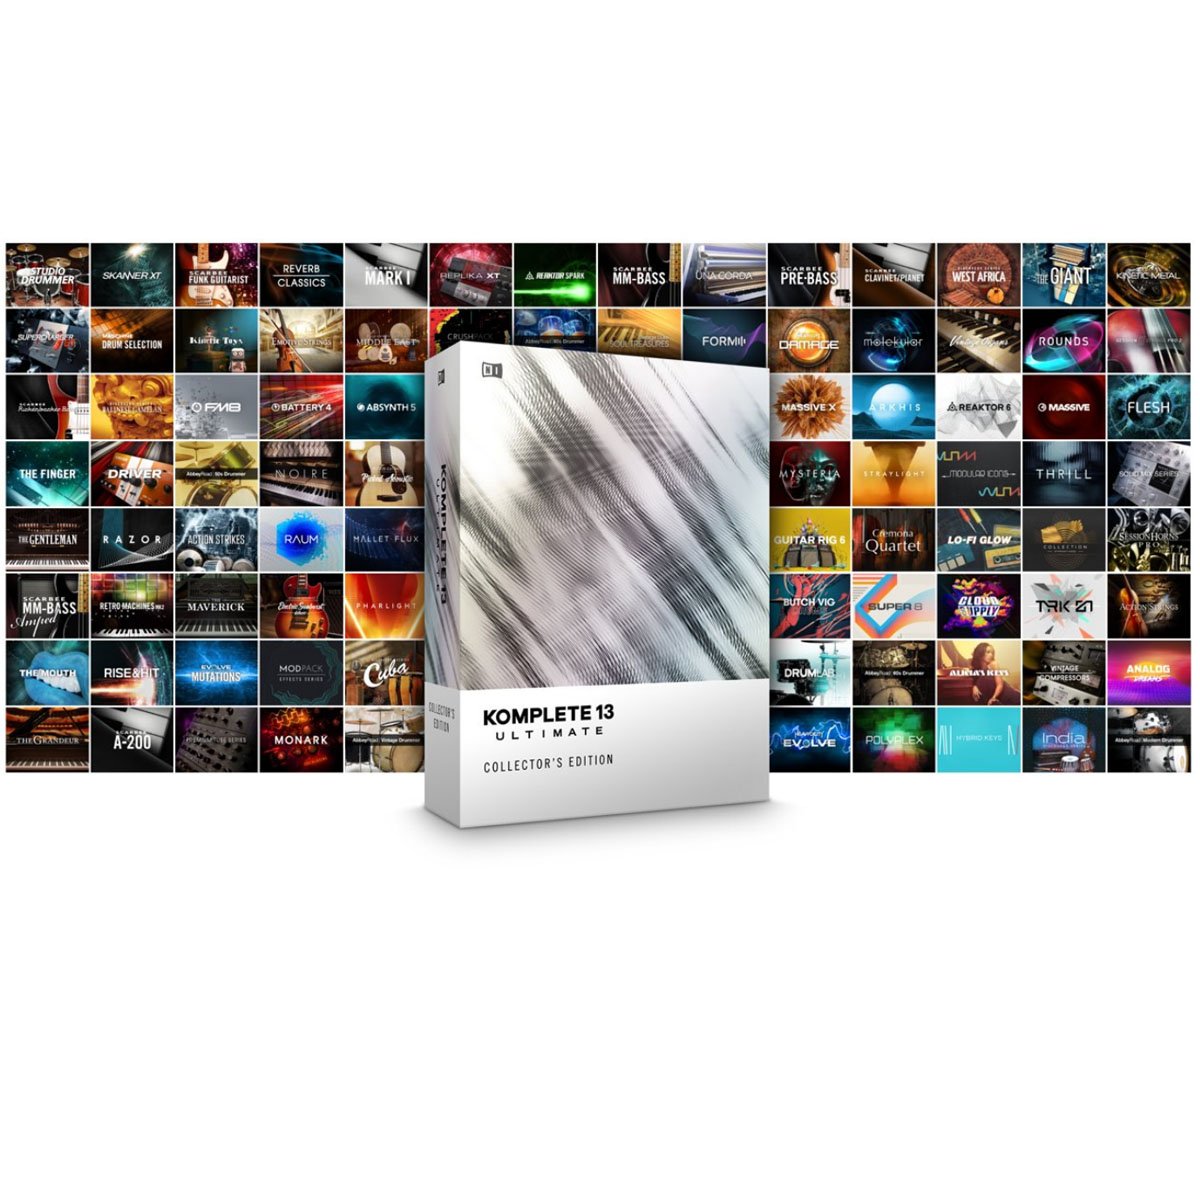 Native Instruments Komplete 13 Ultimate Collectors Edition update (Update from Komplete Ultimate CE 12)